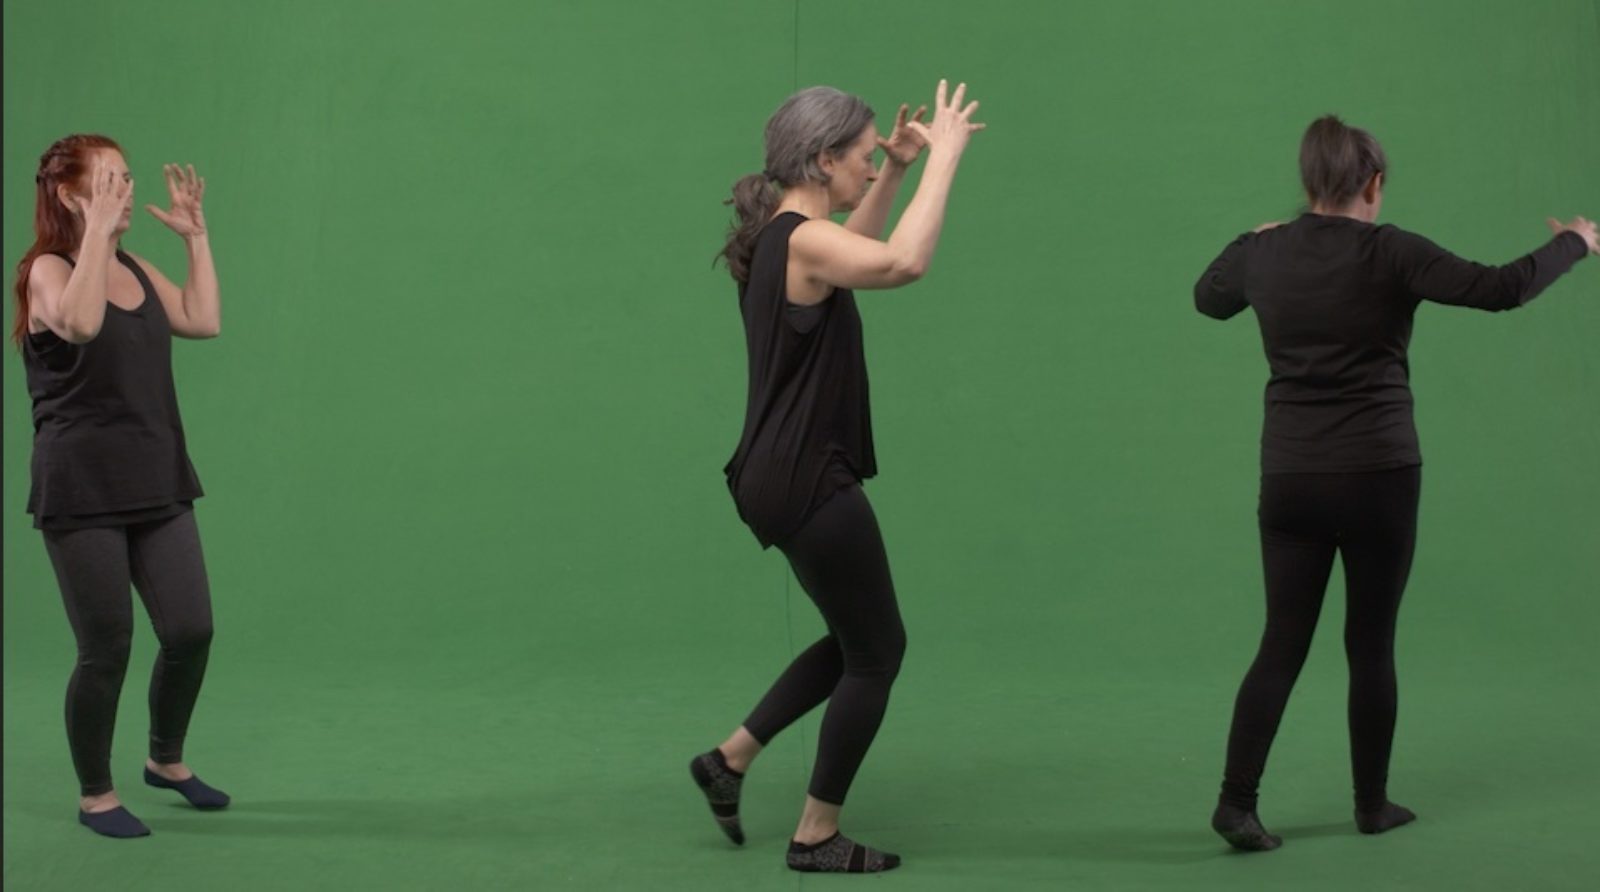 3 Women dressed in all black dancing in front of a green screen.